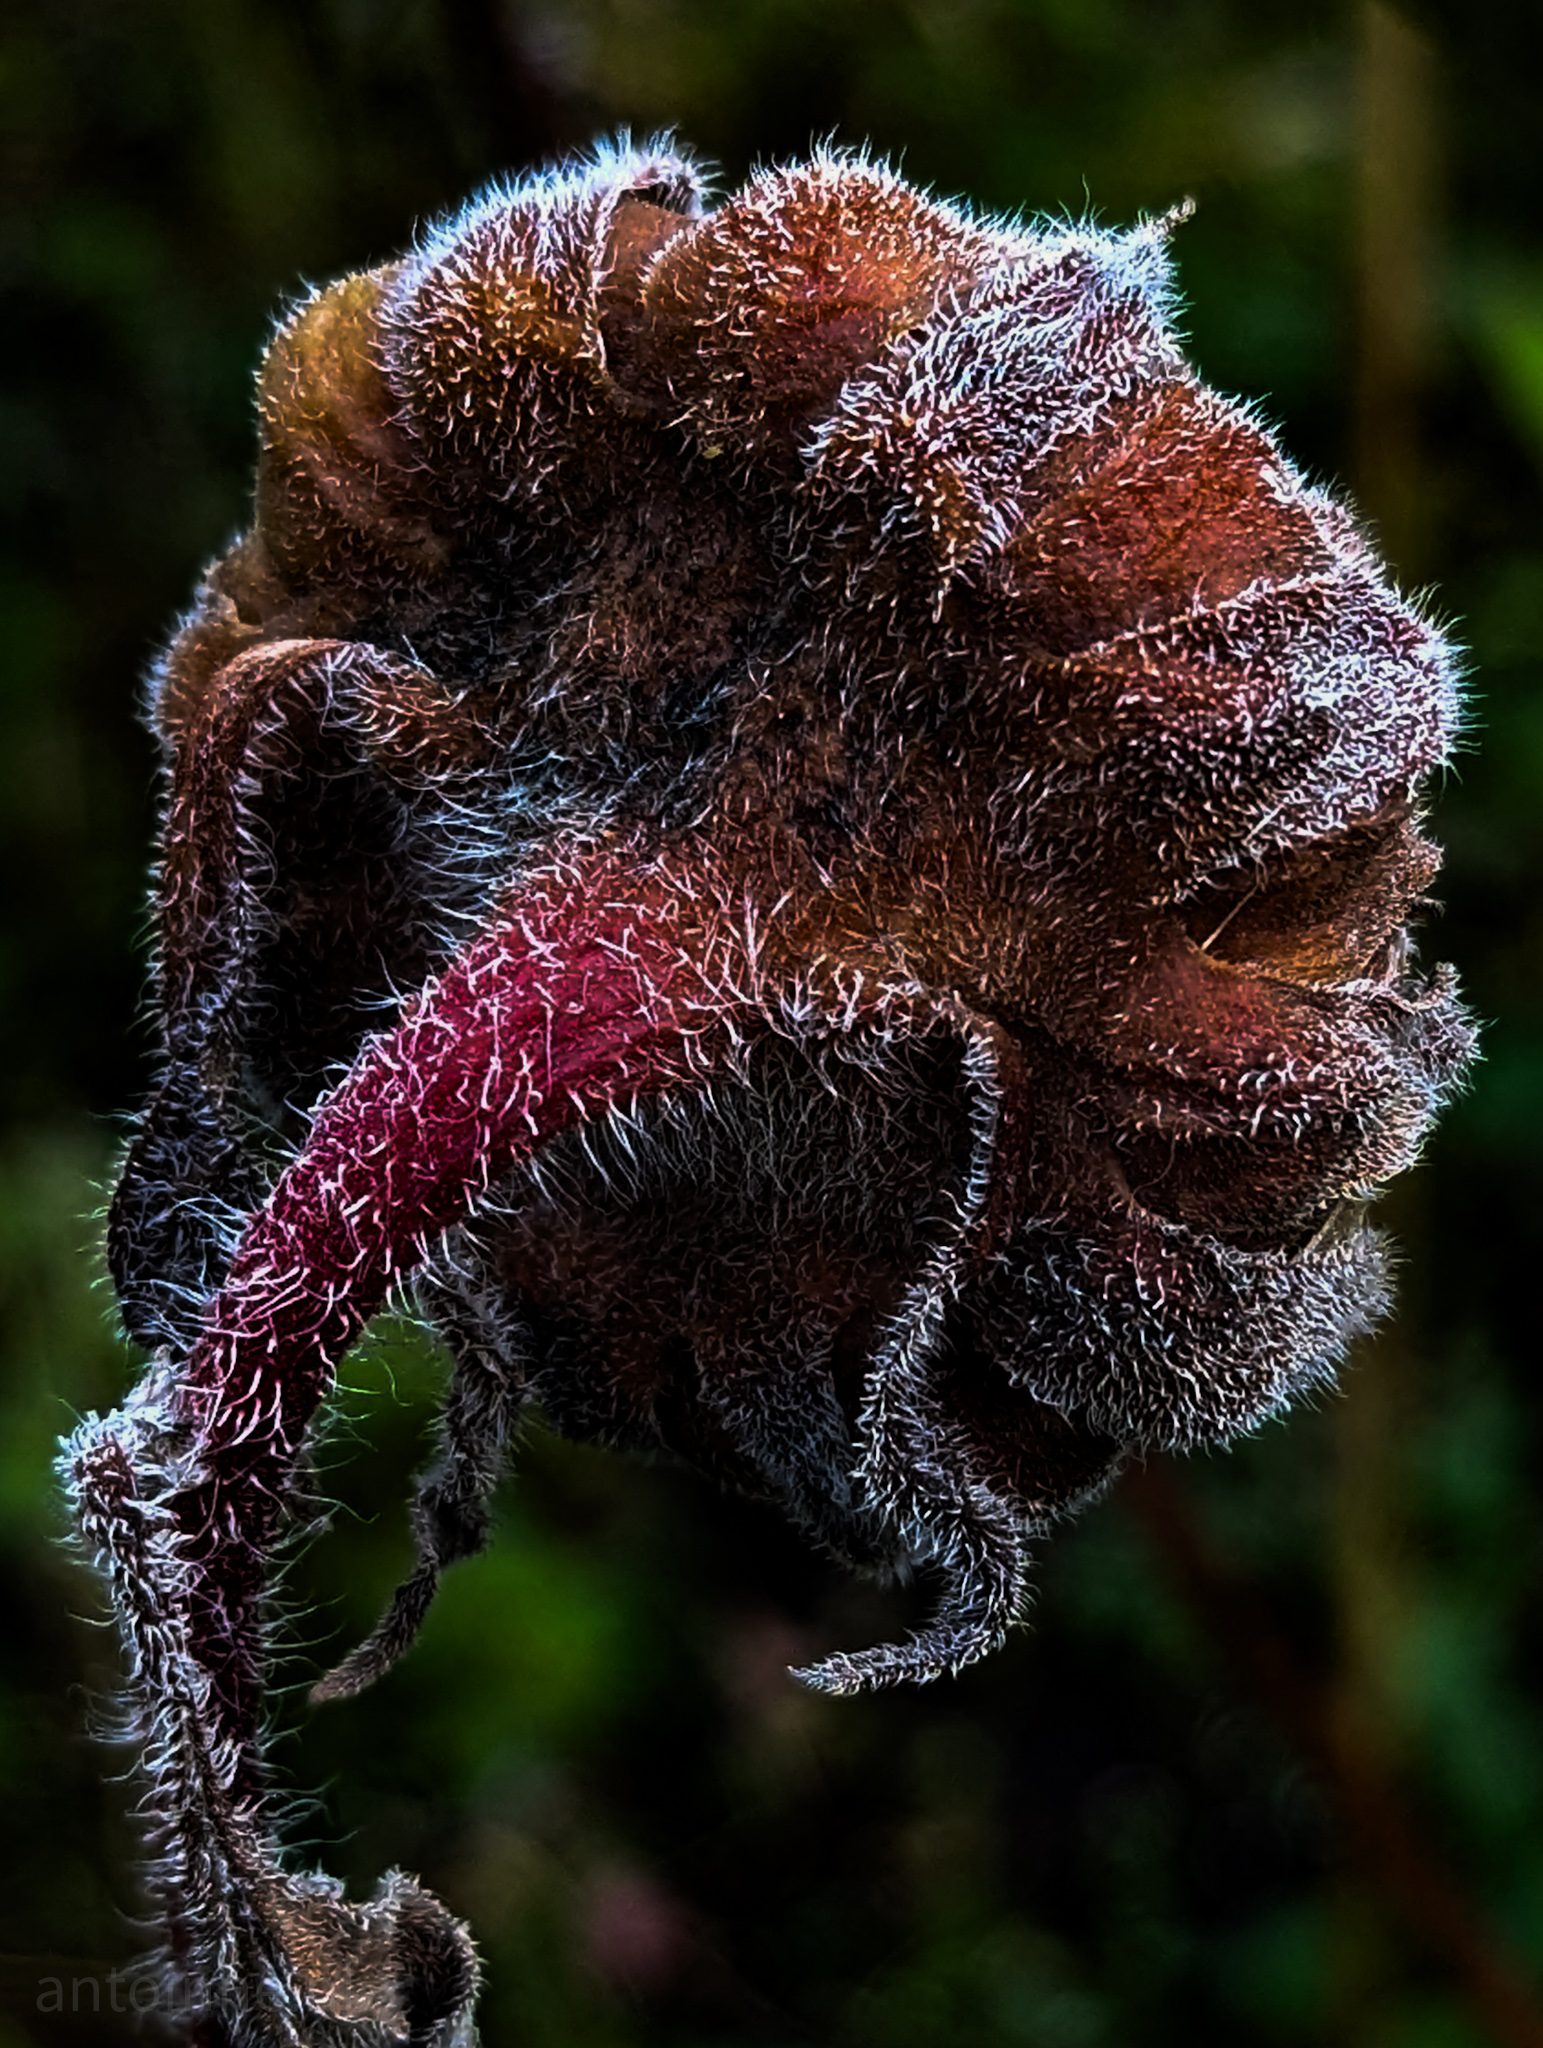 Decaying Flower